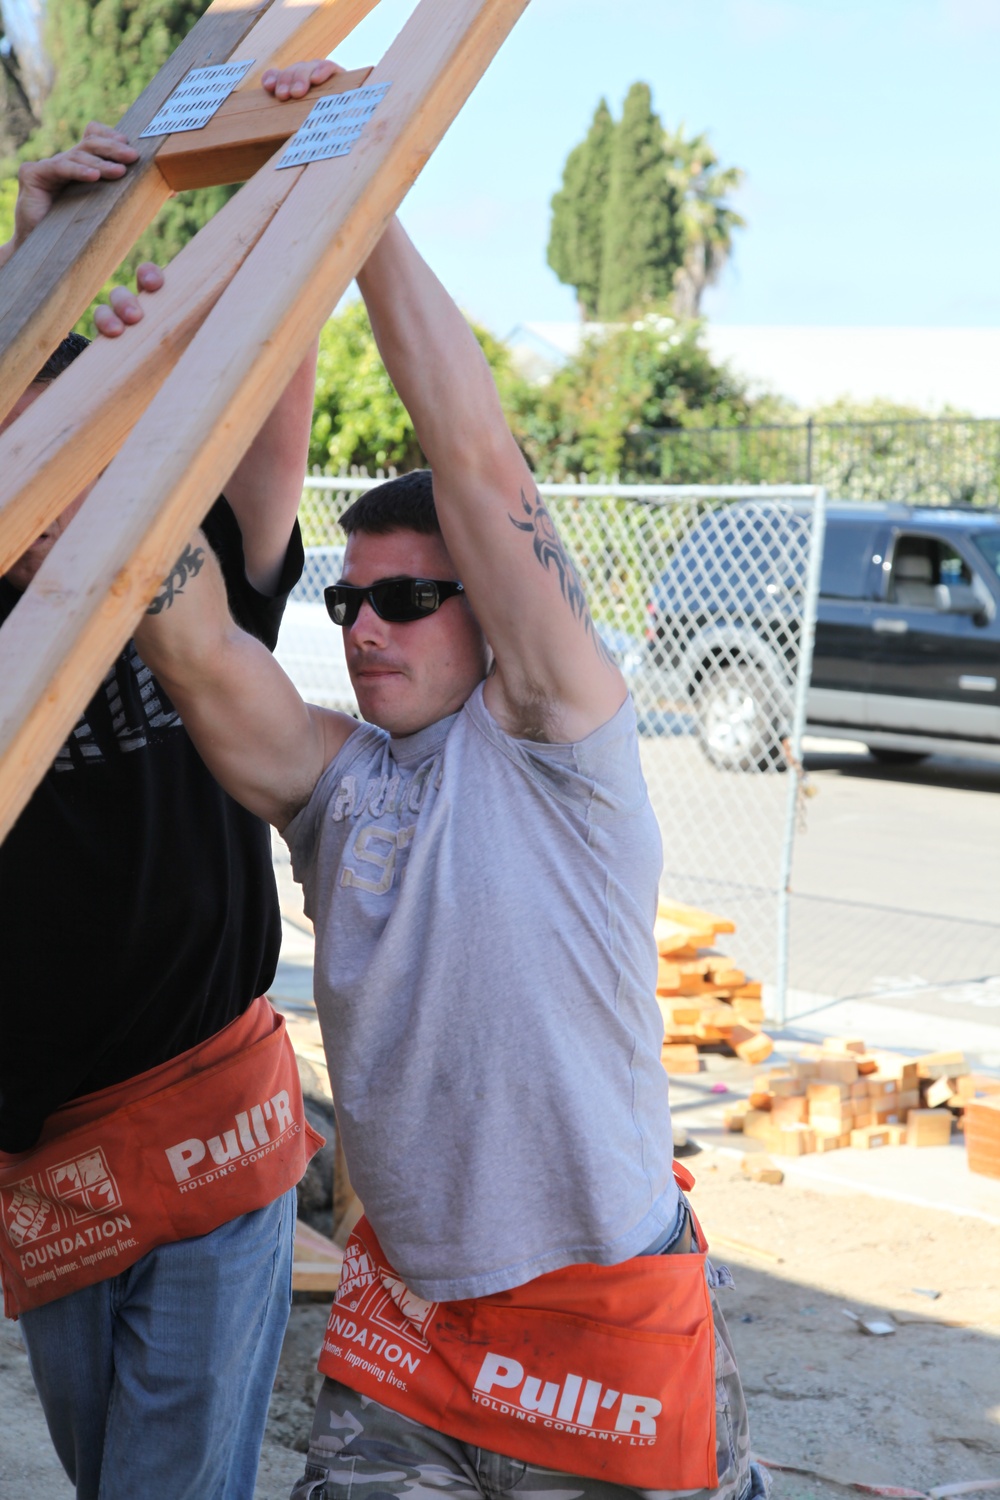 Marines support Habitat for Humanity